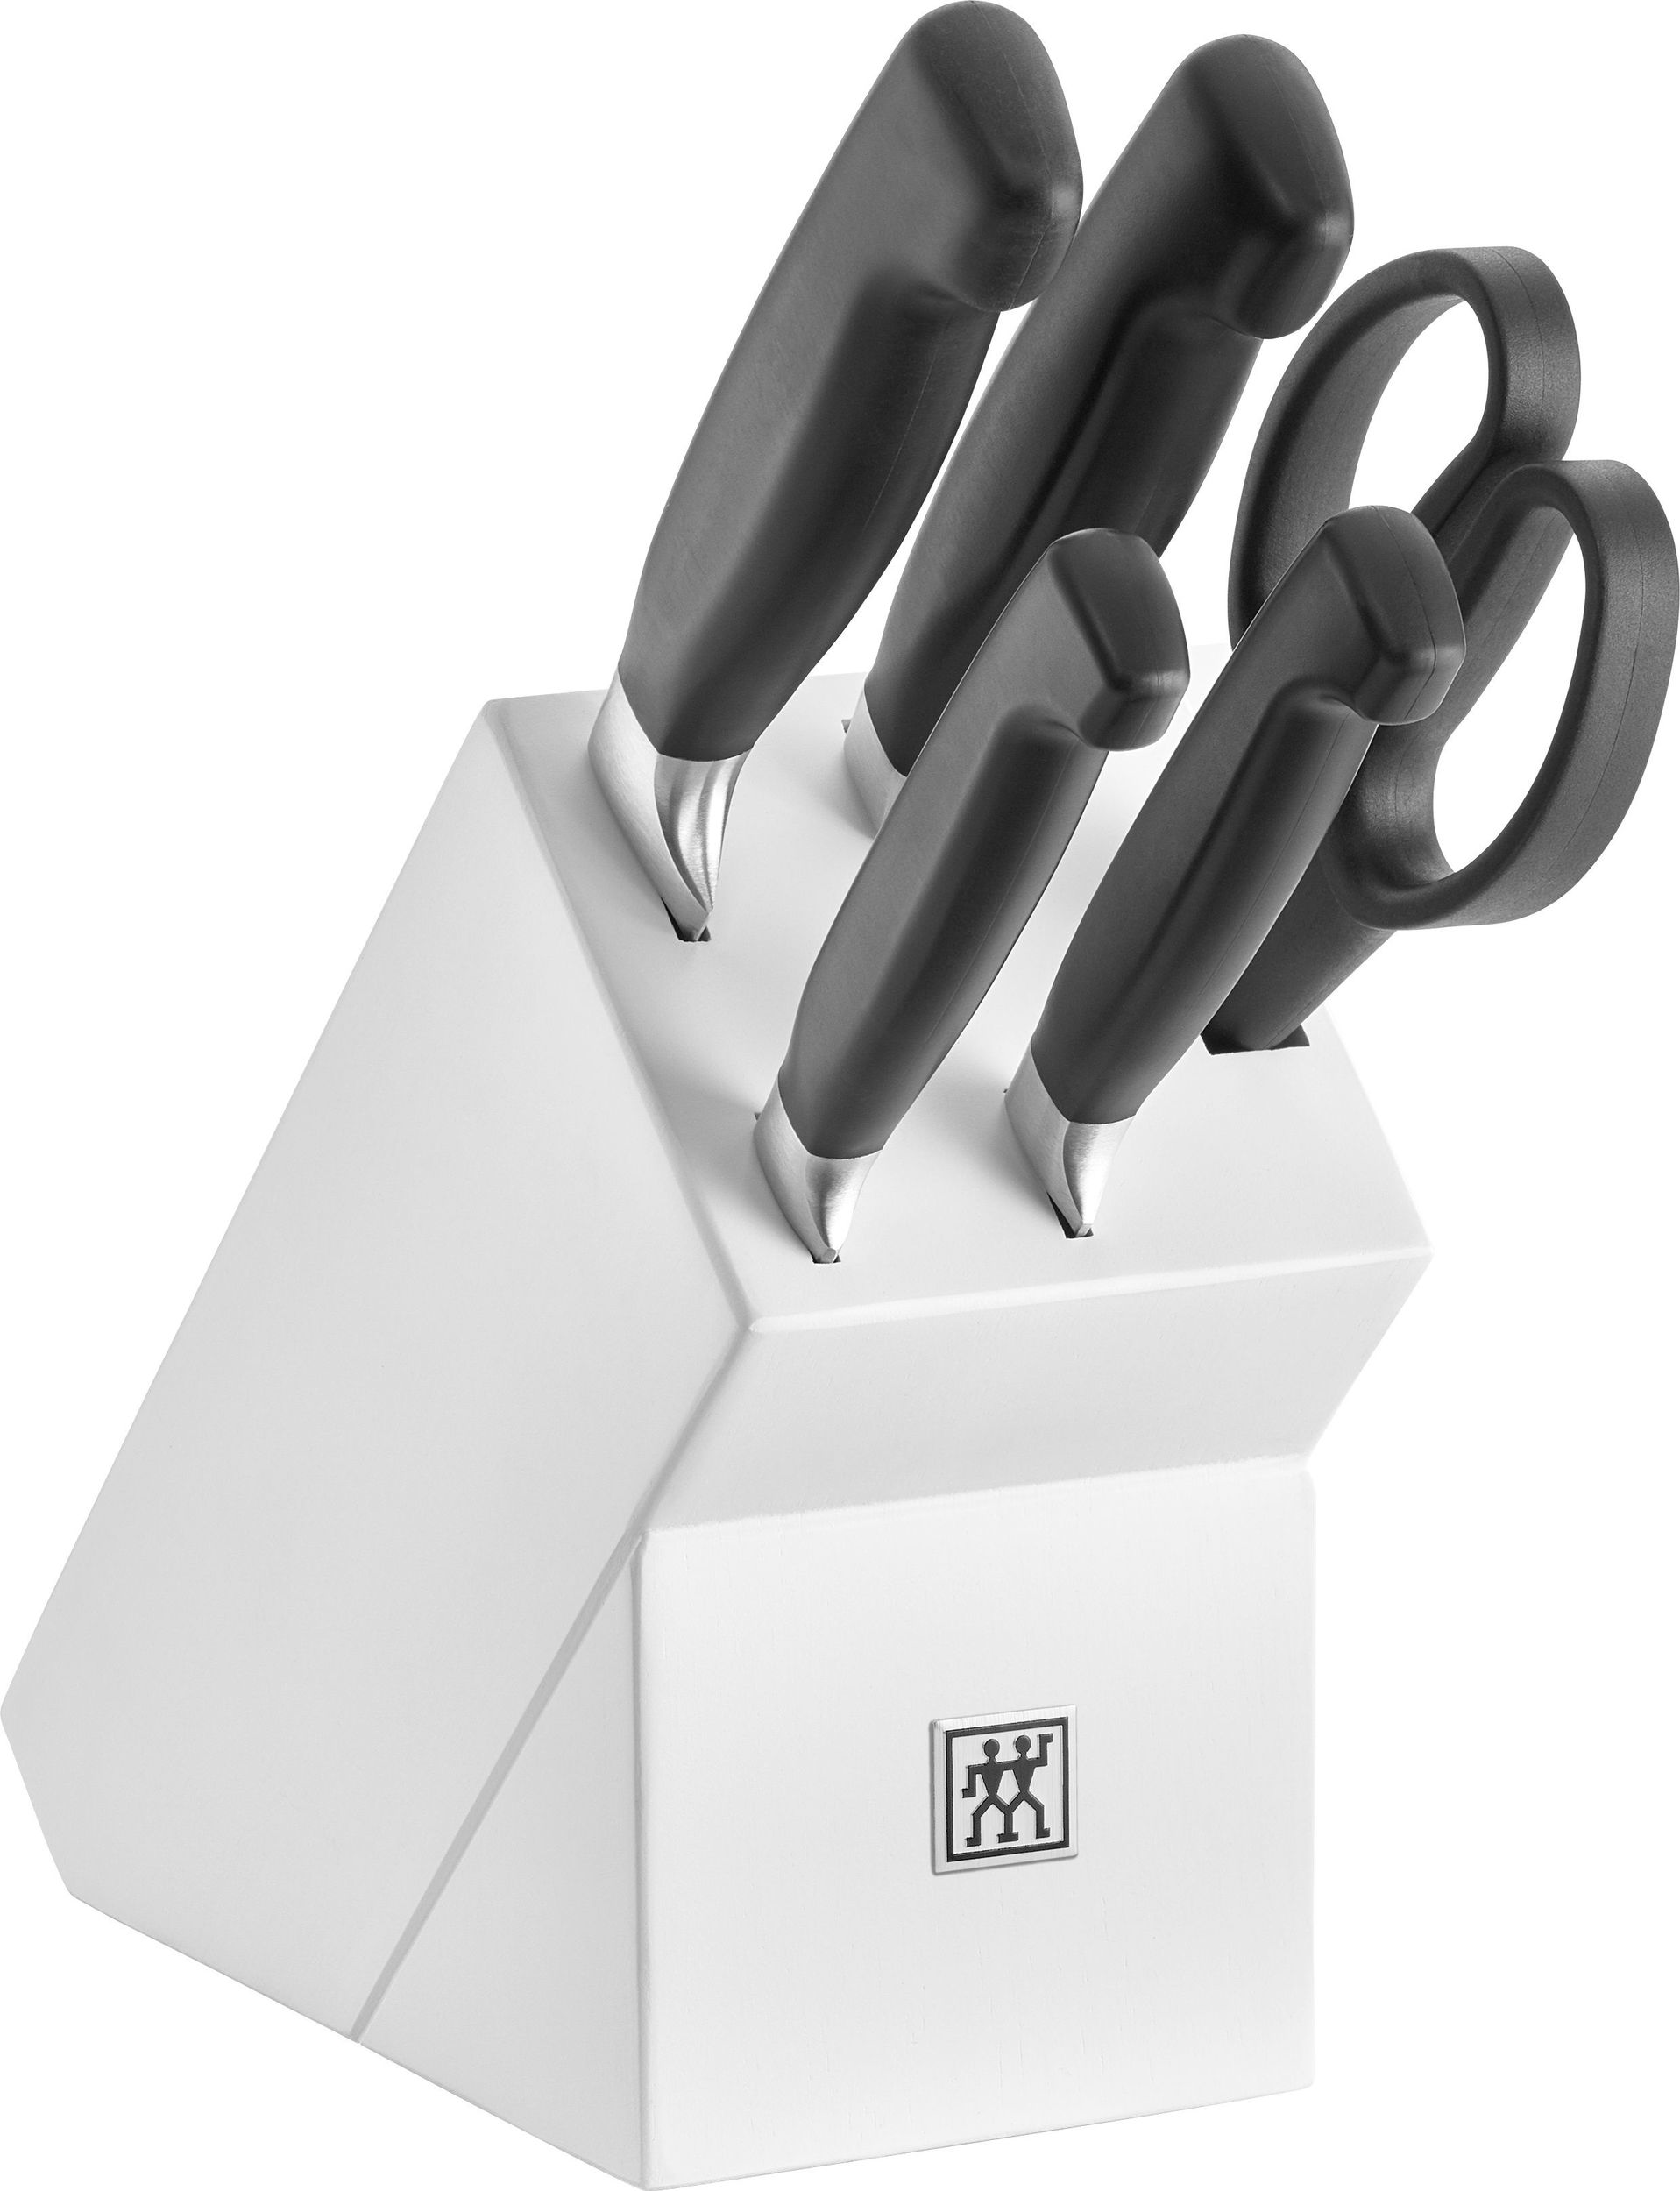 Star scissors and Four knives - 35021-306-0 4 Zwilling Block with